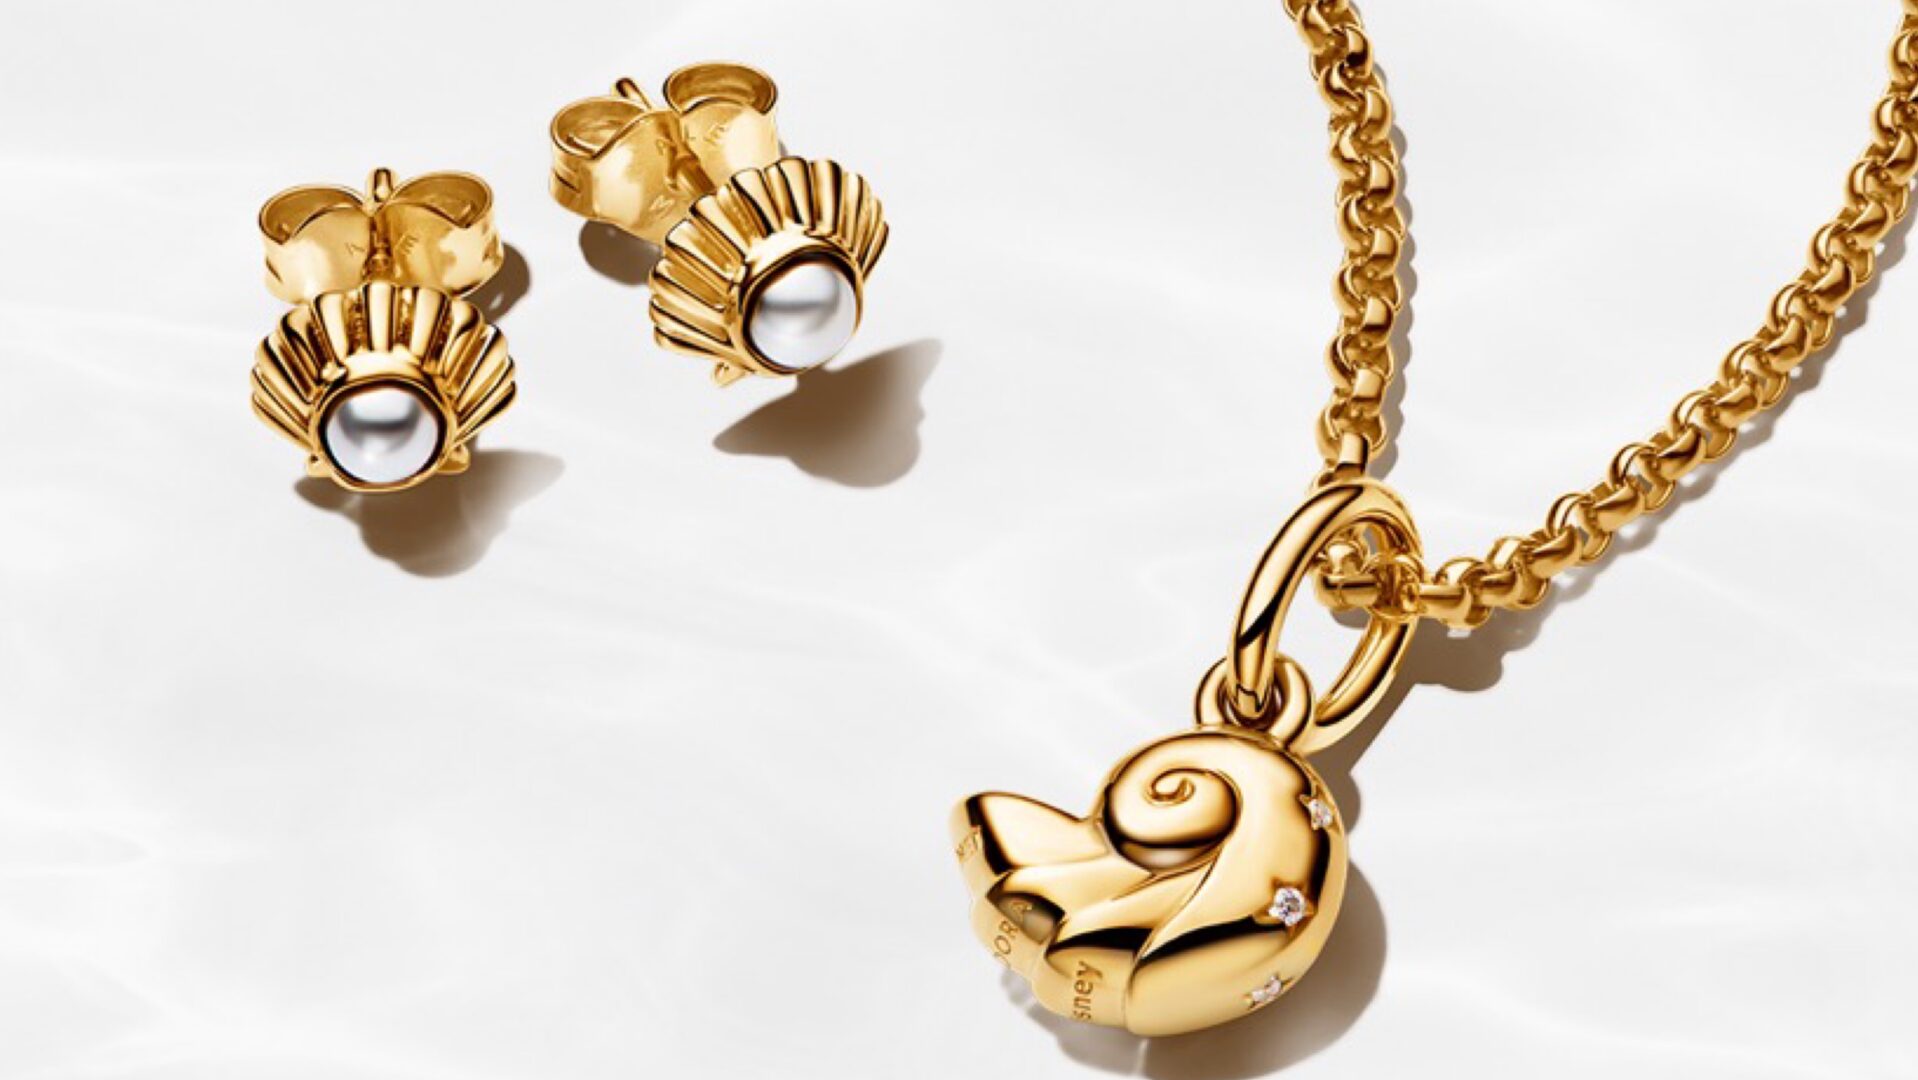 Make The New The Little Mermaid Jewelry Collection From Pandora Part Of Your World!